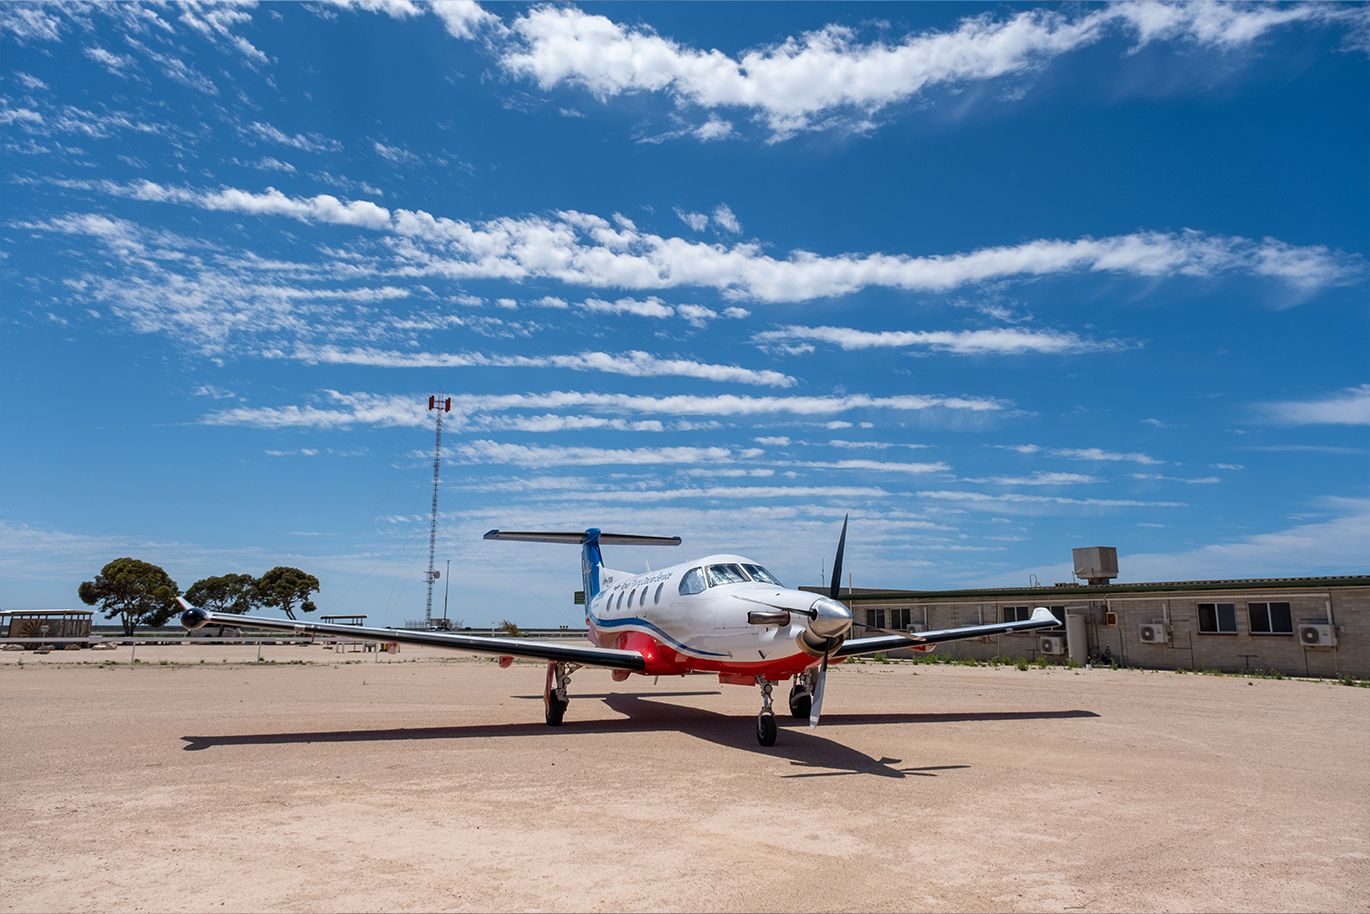 RFDS aircraft at Nullarbor Roadhouse